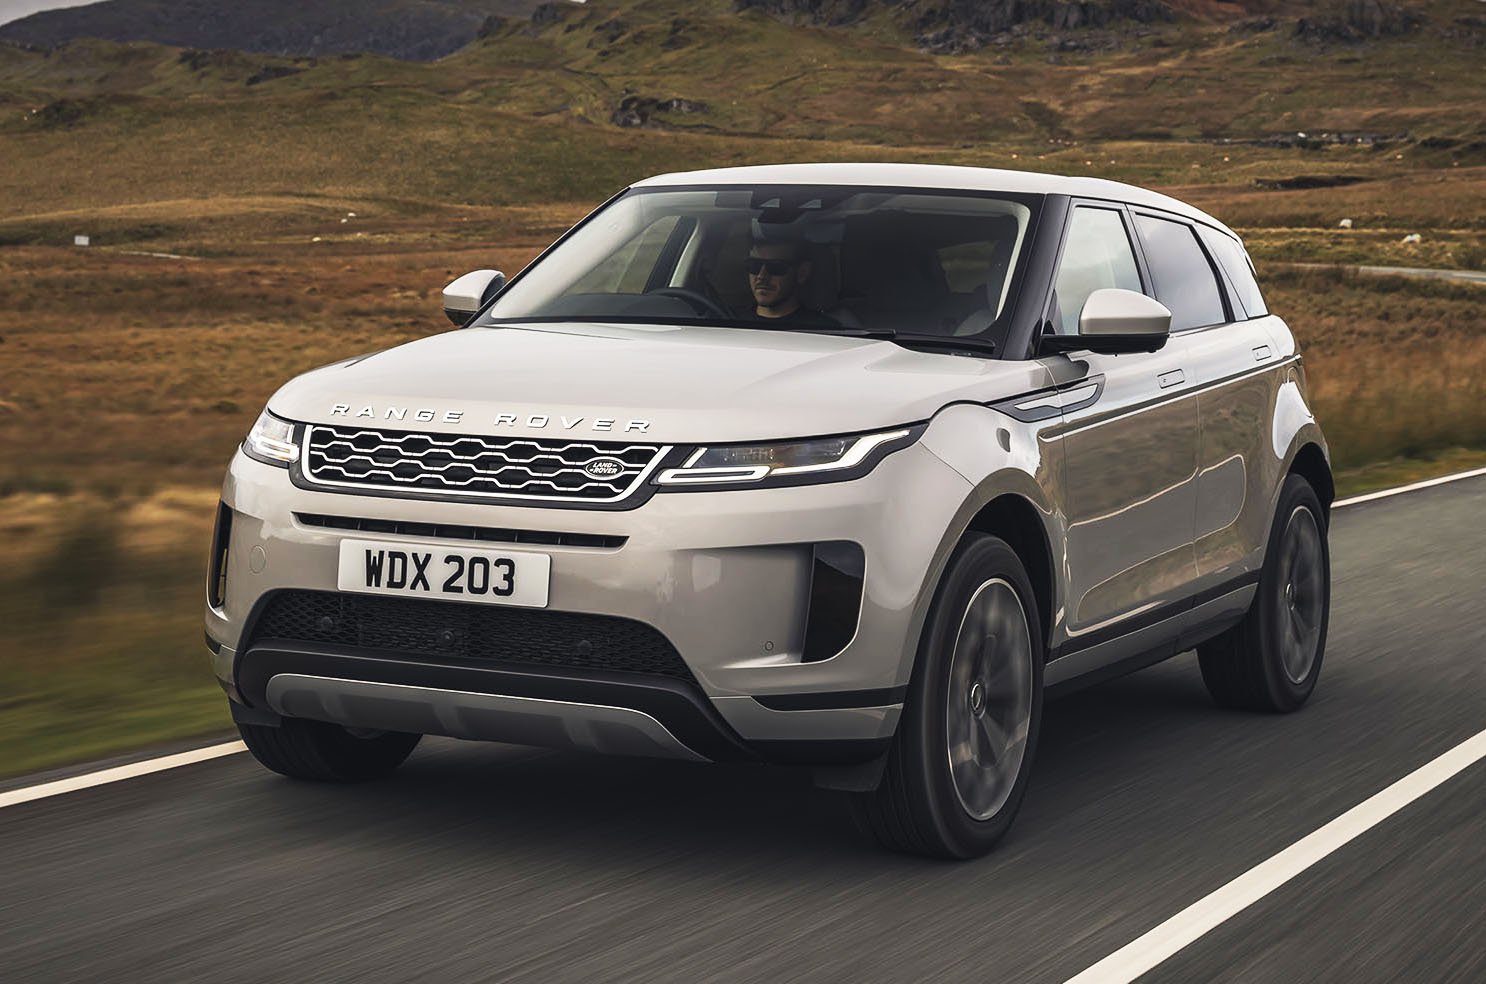 <p><strong>What Car? Target Price from £32,100</strong></p>  <p>It might well be the Evoque’s looks that first pique your interest, but it’s a sensational car on more objective levels, too. Good to drive, really posh inside and surprisingly practical, it even makes financial sense thanks to <strong>incredibly strong resale values </strong>and attractive monthly PCP finance costs. In short, it's the best family SUV you can buy today.</p>